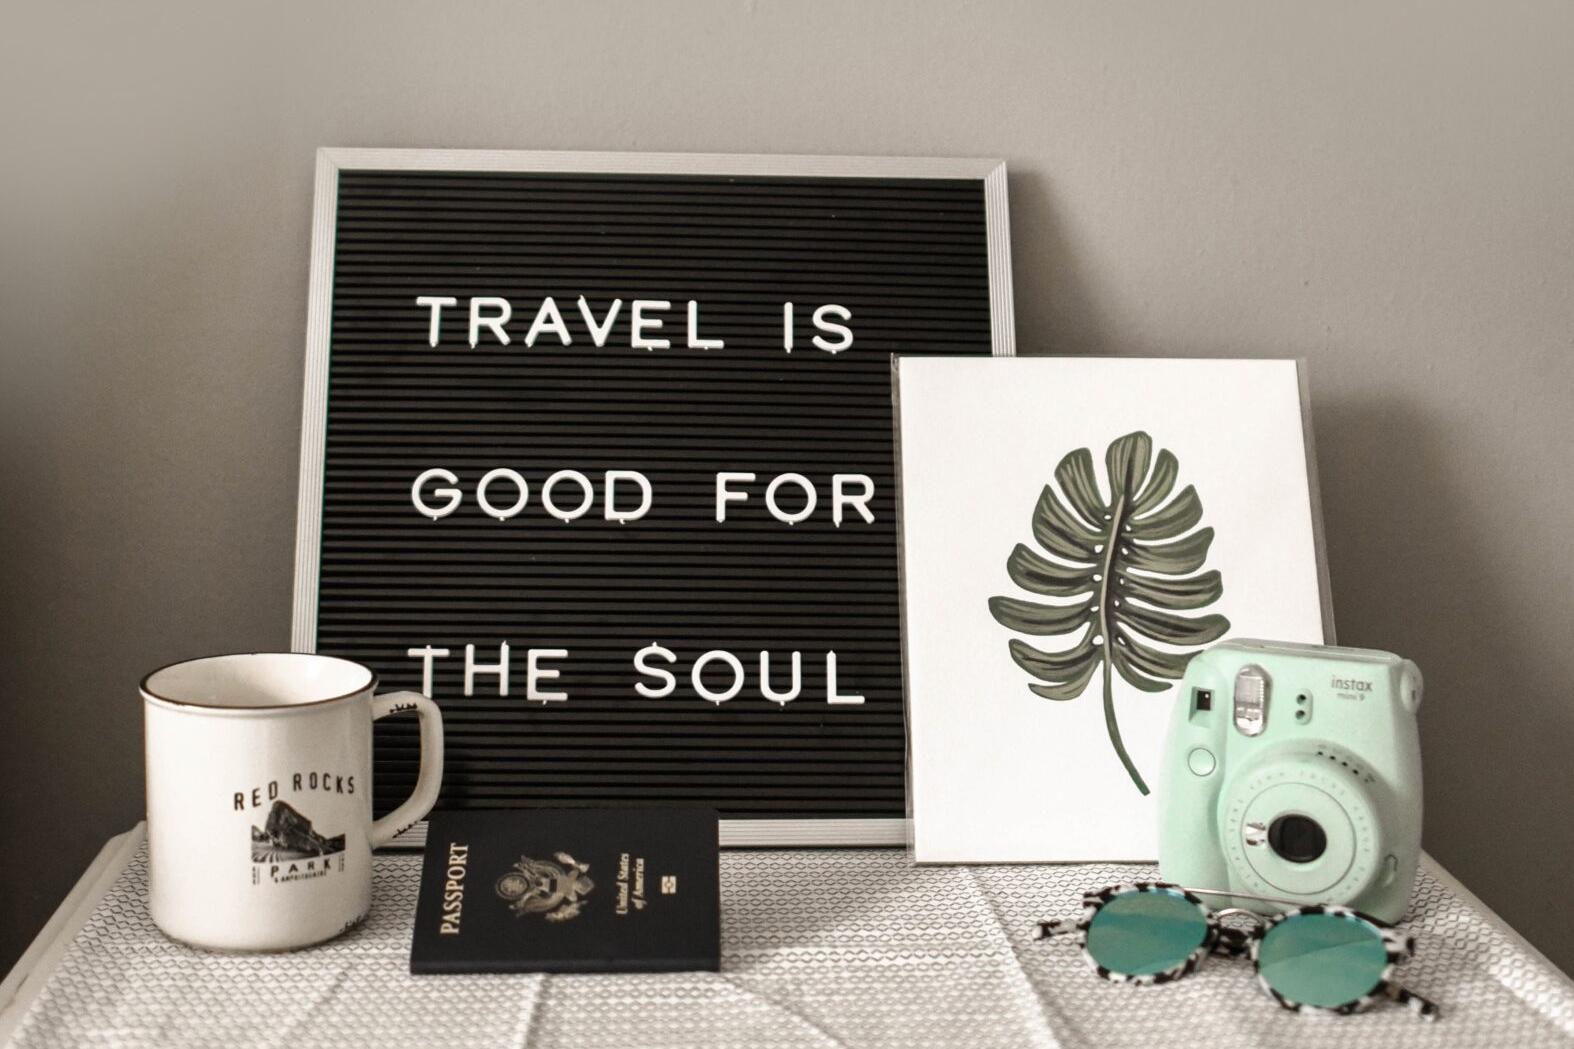 Travel is good for the soul